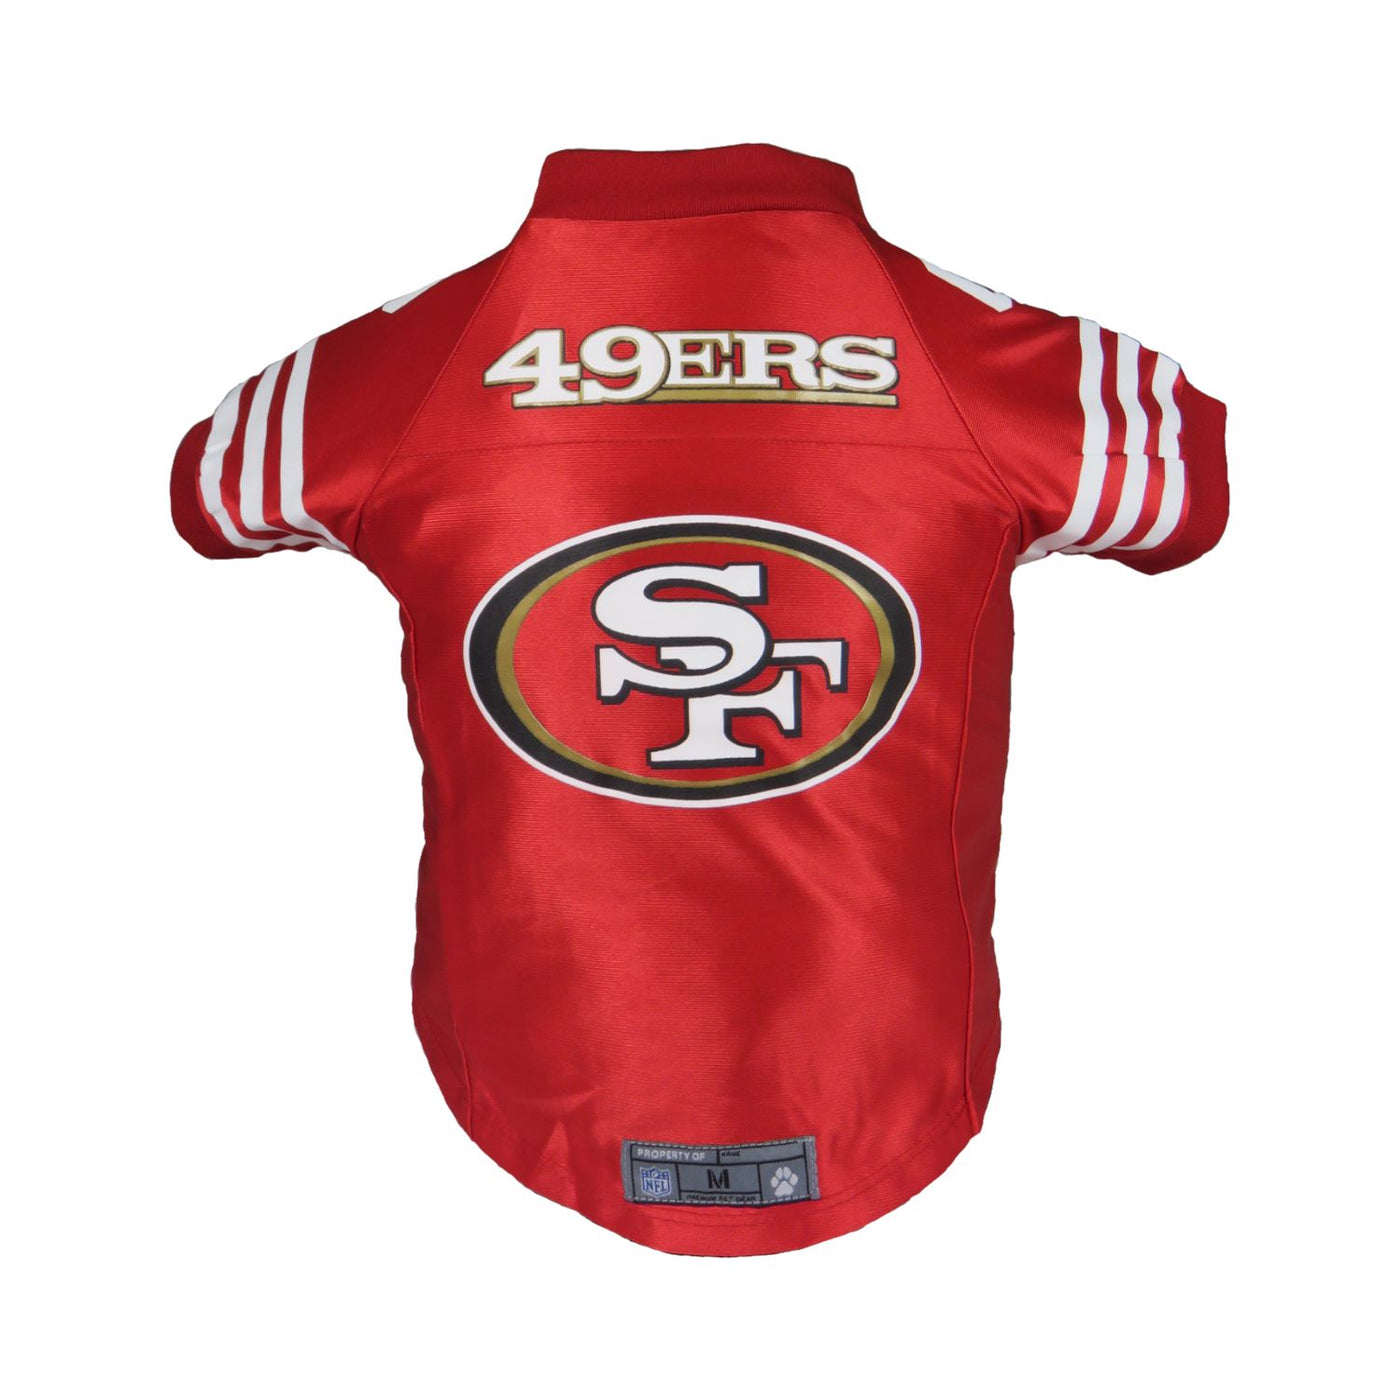 NFL SAN Francisco 49ERS Hoodie for Dogs & Cats., NFL Football Licensed Dog  Hoody Tee Shirt, Medium, Sports Hoody T-Shirt for Pets